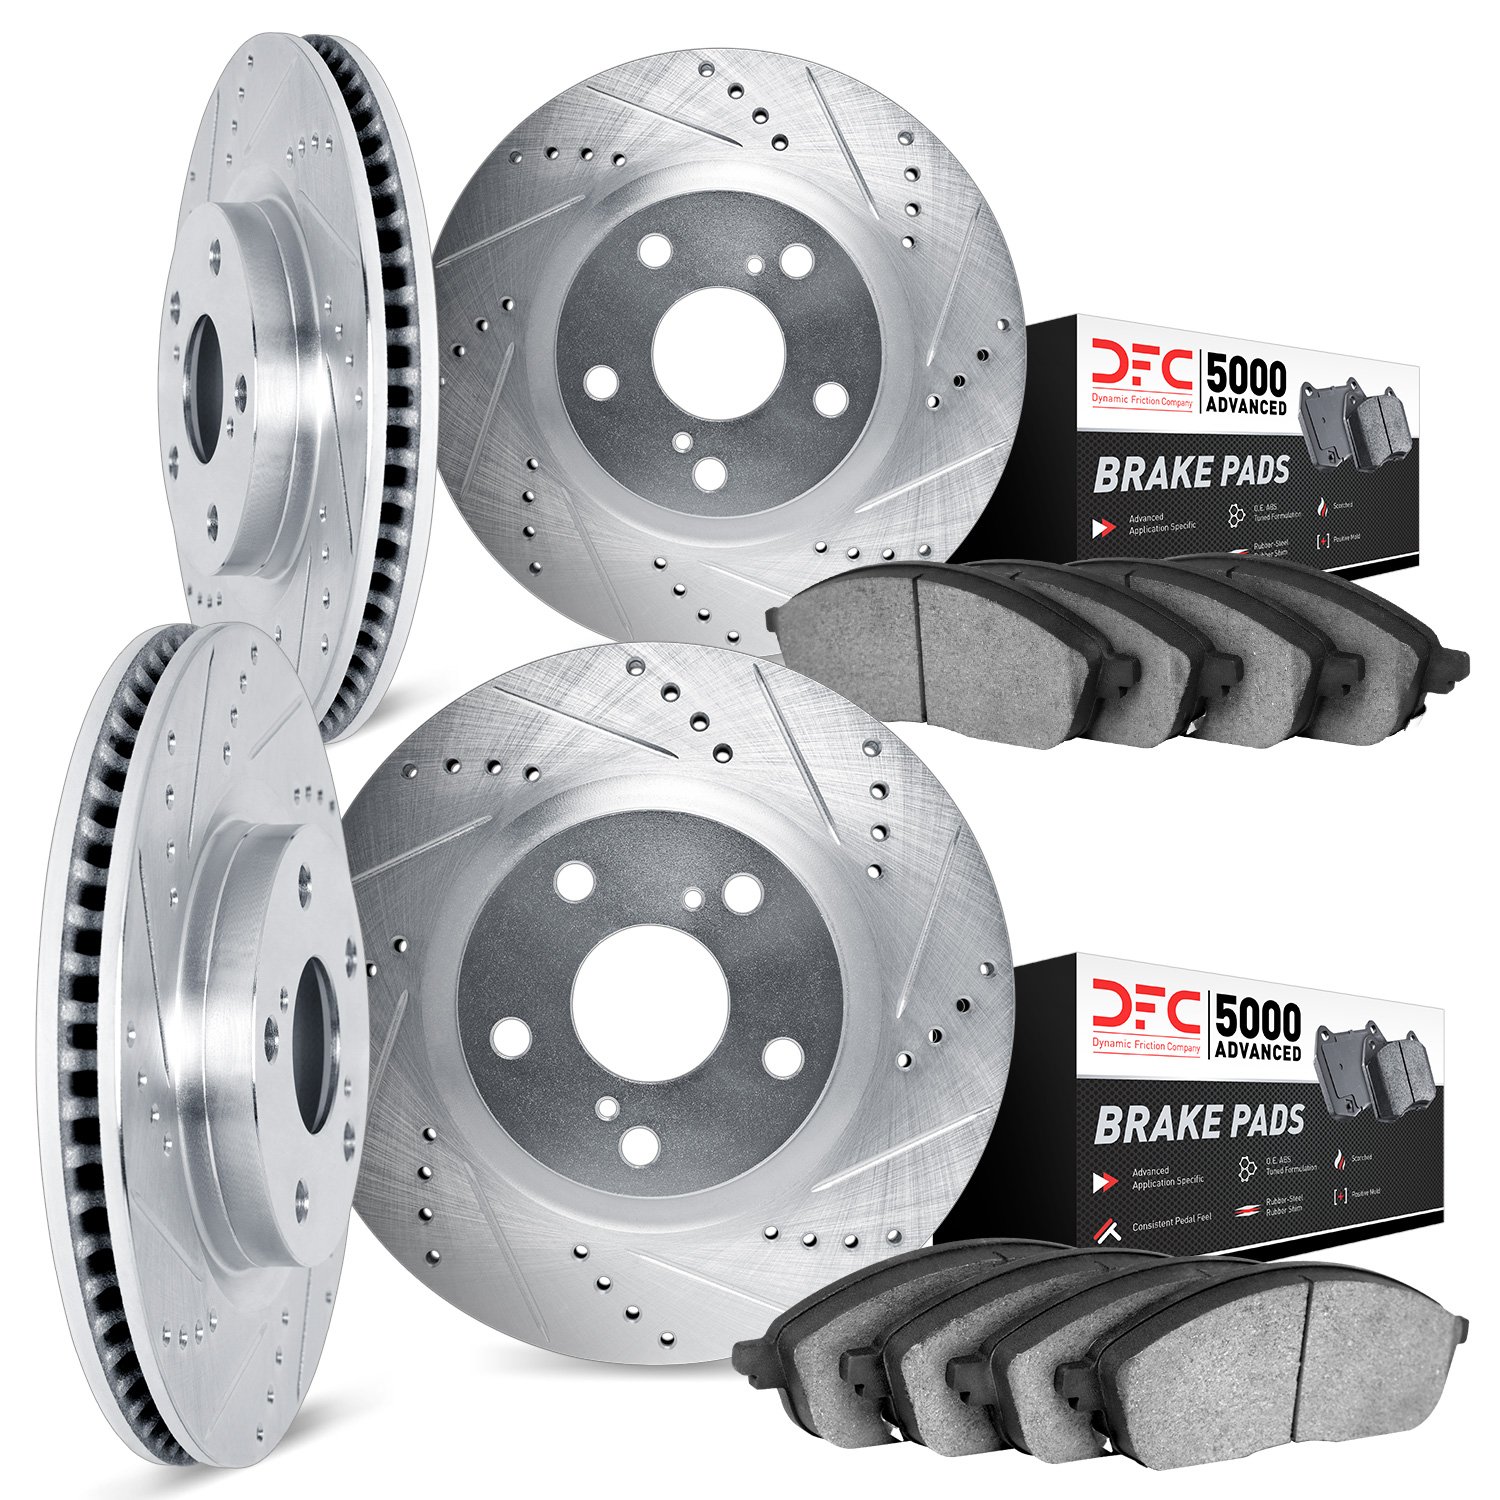 7504-31020 Drilled/Slotted Brake Rotors w/5000 Advanced Brake Pads Kit [Silver], 2006-2007 BMW, Position: Front and Rear